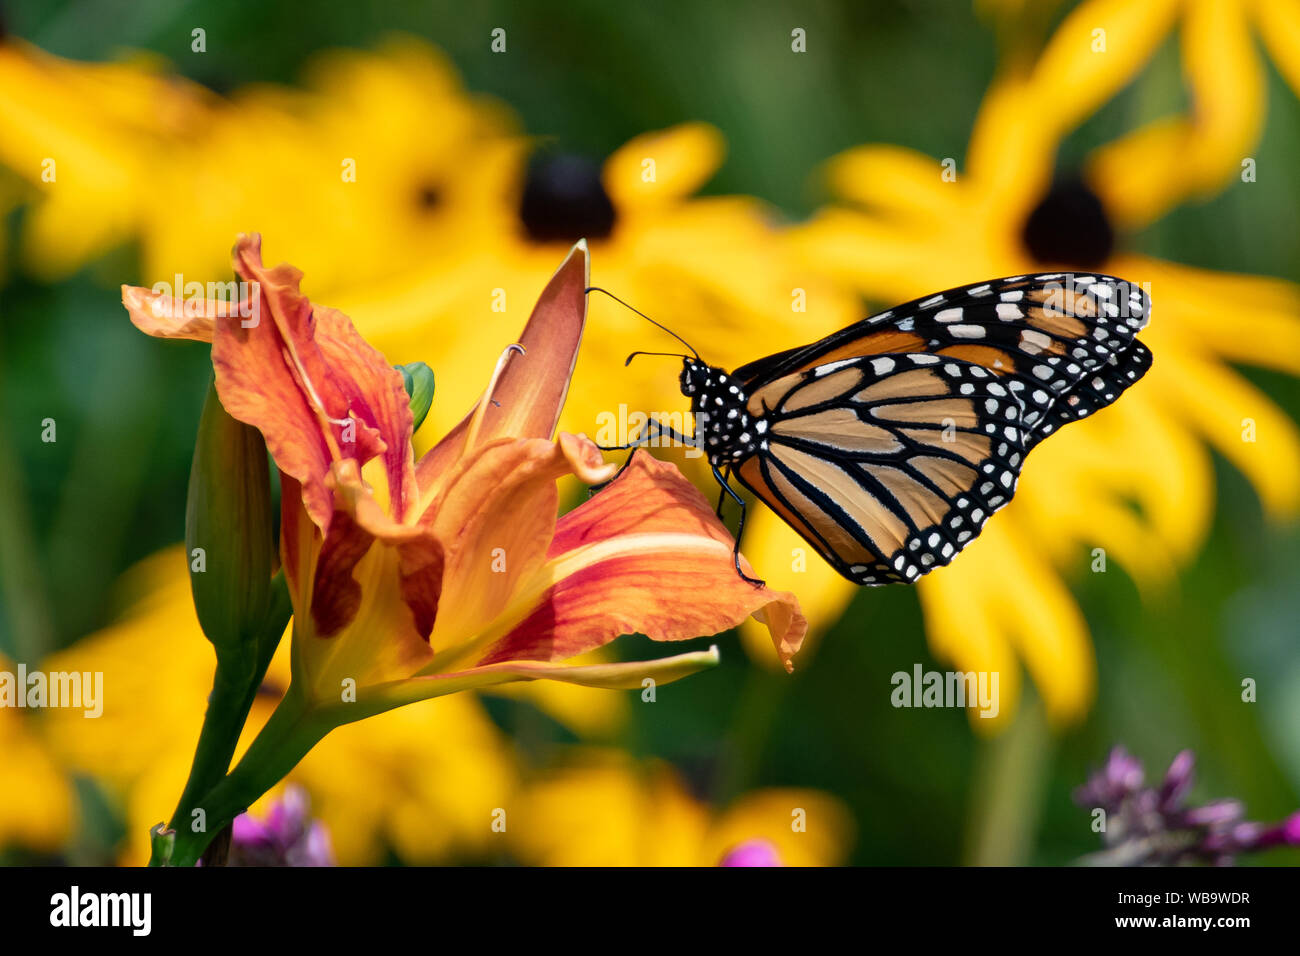 A monarch butterfly feeding on an orange double day lily in a garden in Speculator, NY USA Stock Photo